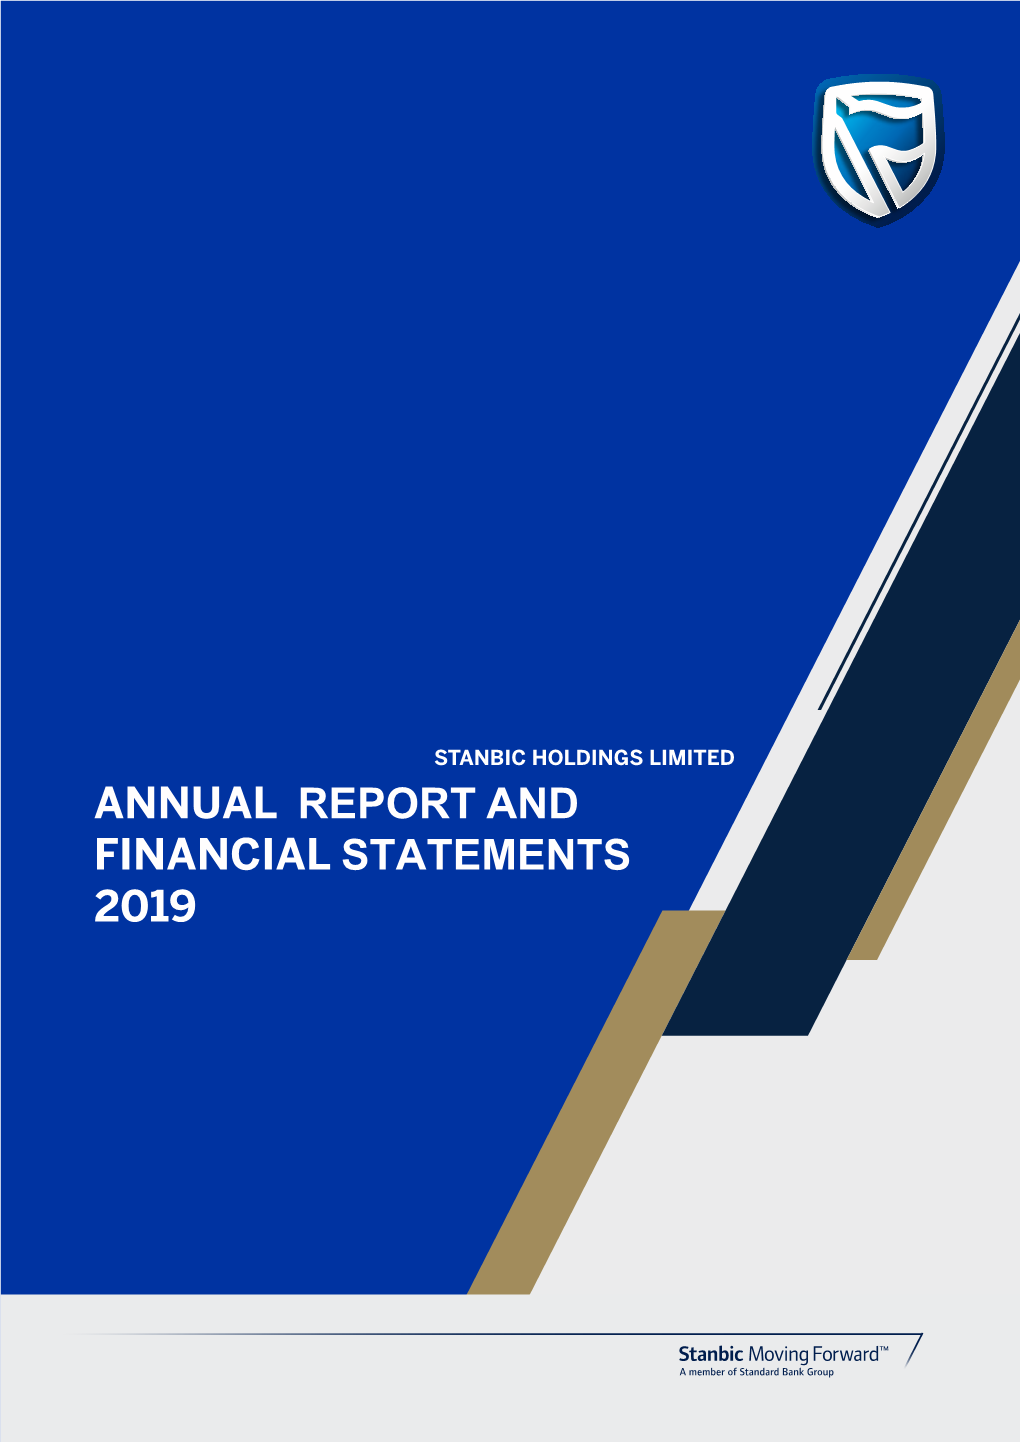 Annual Report and Financial Statements 2019